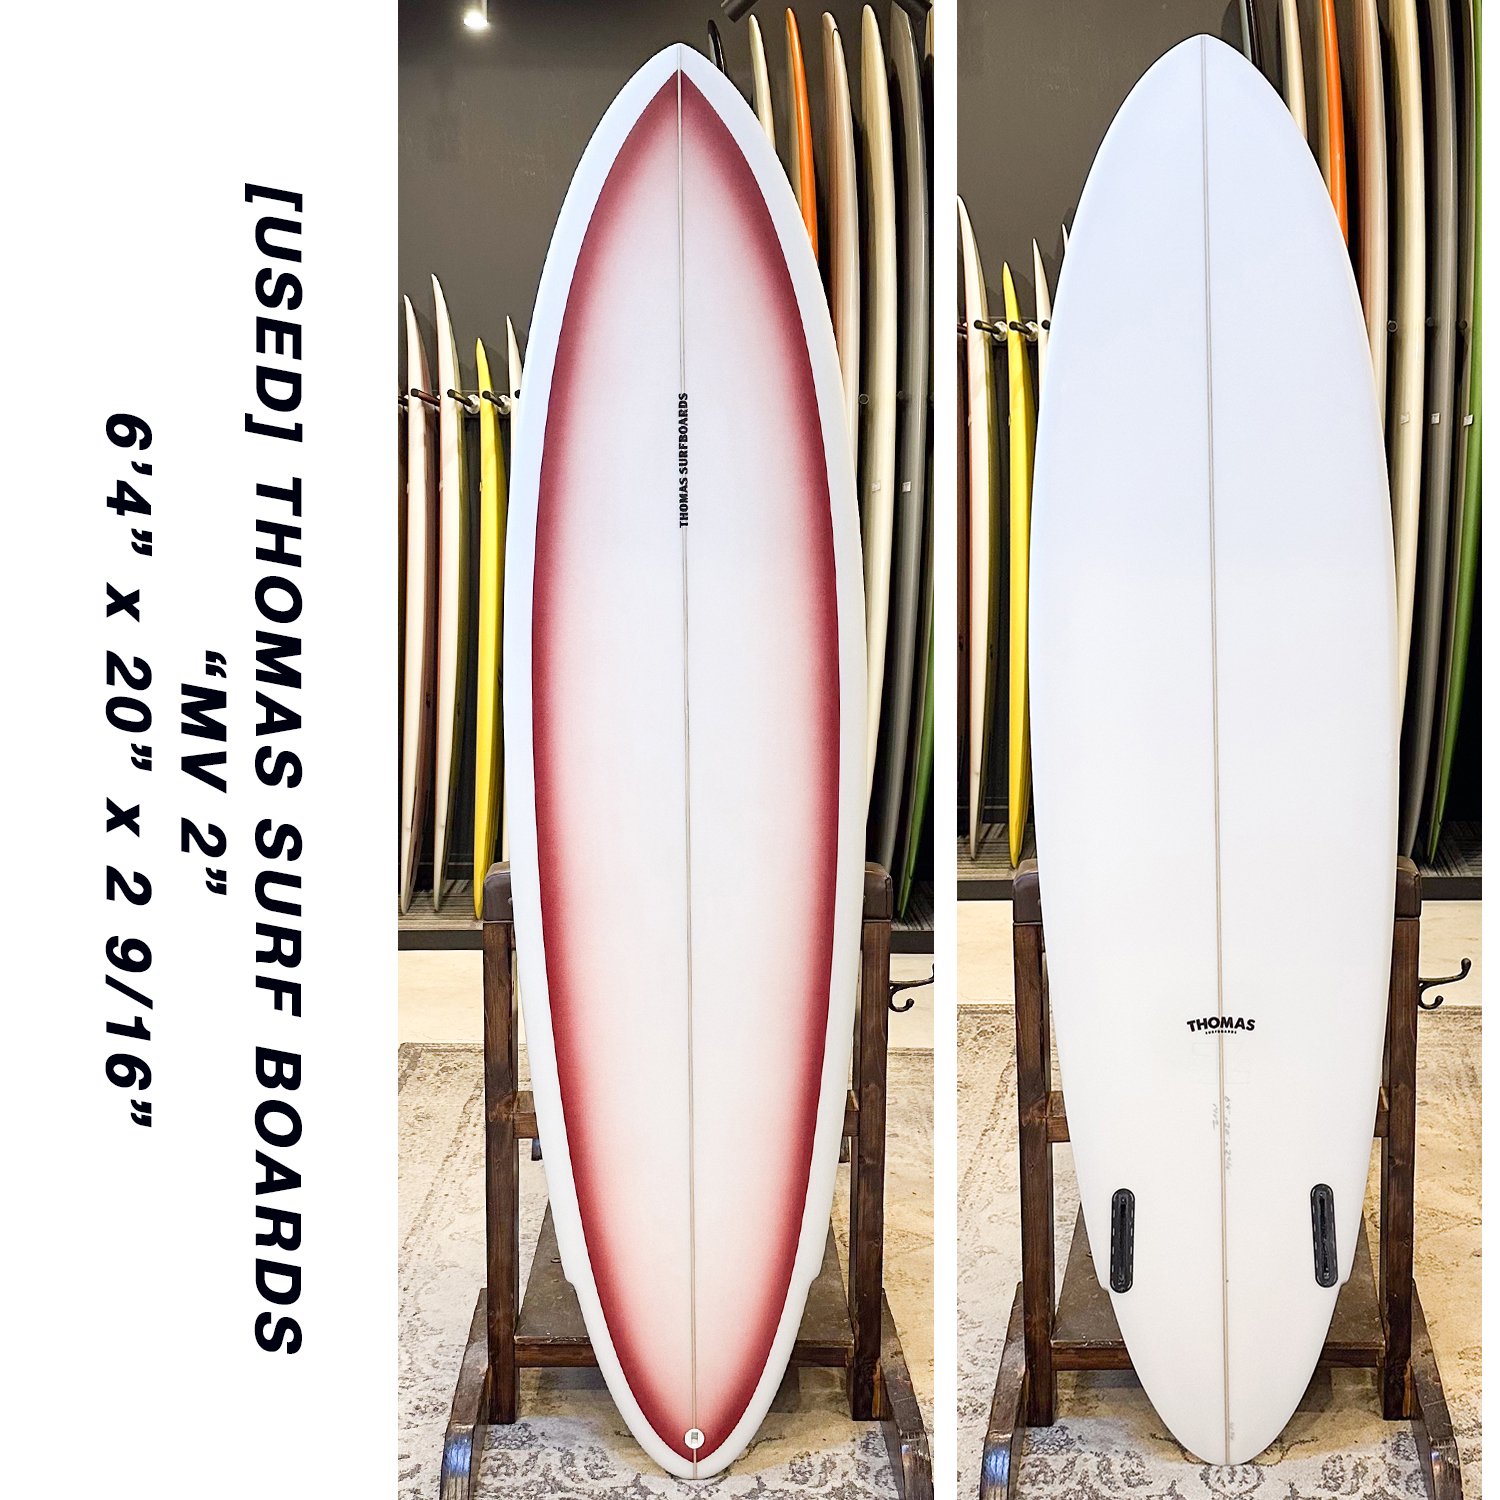 <img class='new_mark_img1' src='https://img.shop-pro.jp/img/new/icons25.gif' style='border:none;display:inline;margin:0px;padding:0px;width:auto;' />USED BOARDThomas surfboards MV 2 6'4"  FINå()